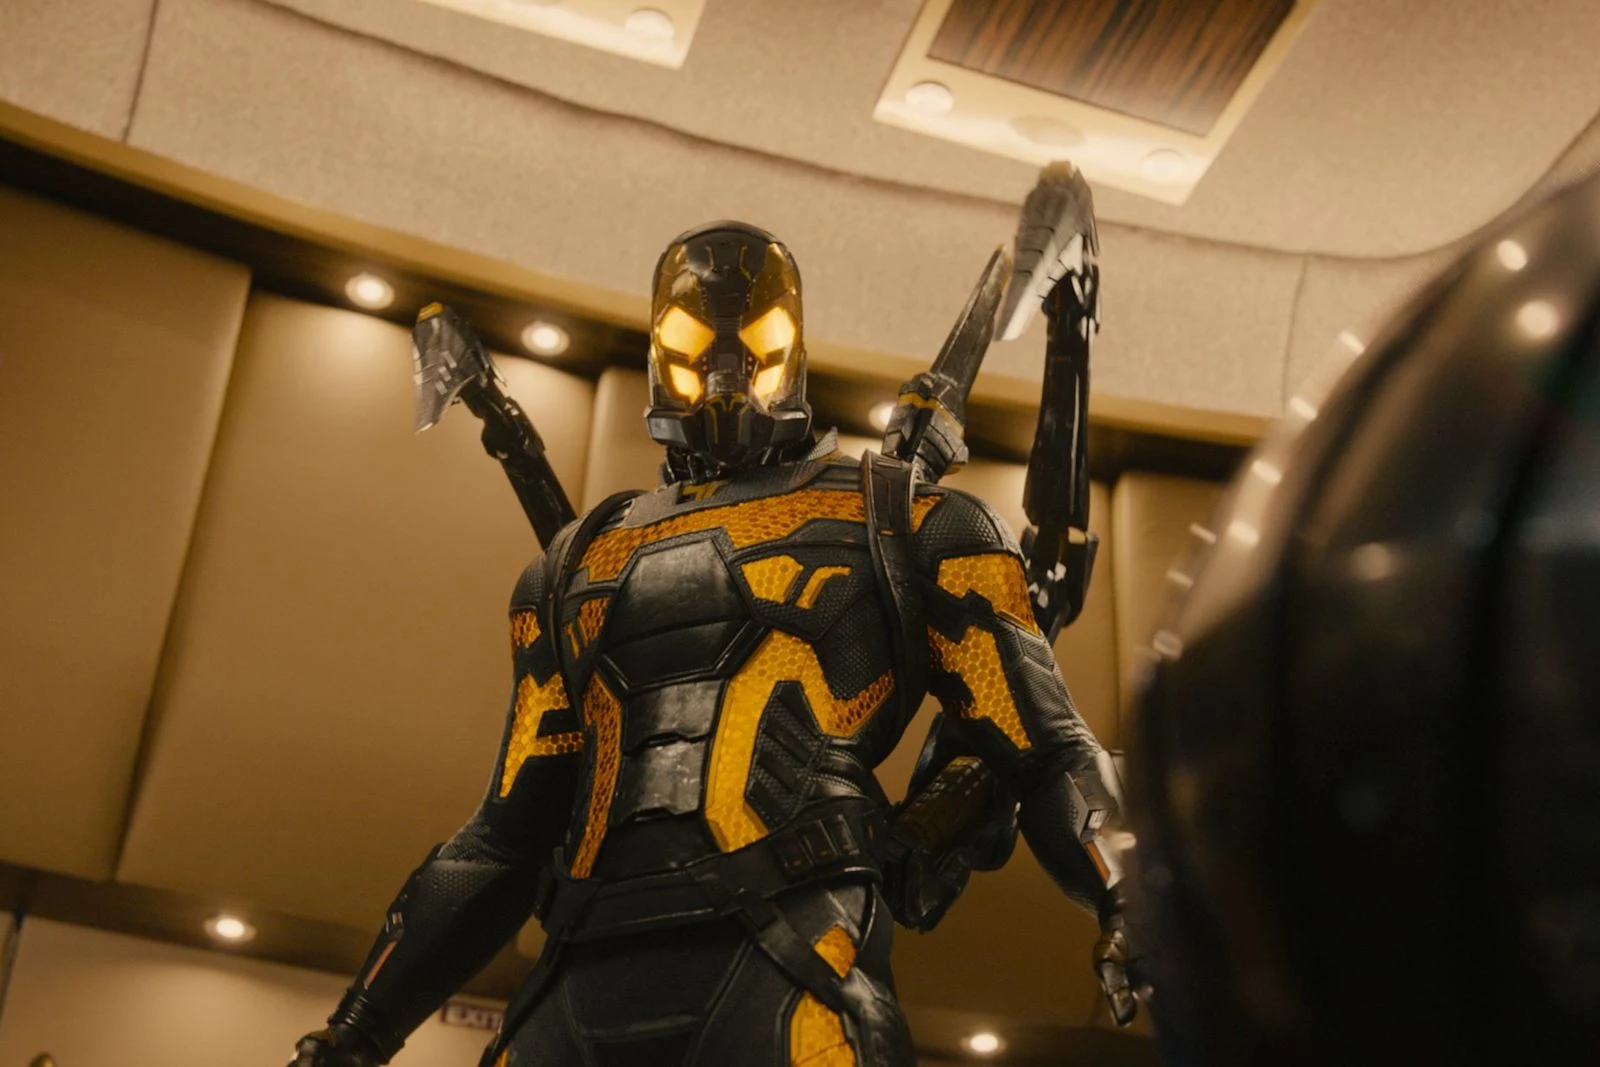 The Director of 'Ant-Man' Was Not a Fan of the Villain of Ant-Man